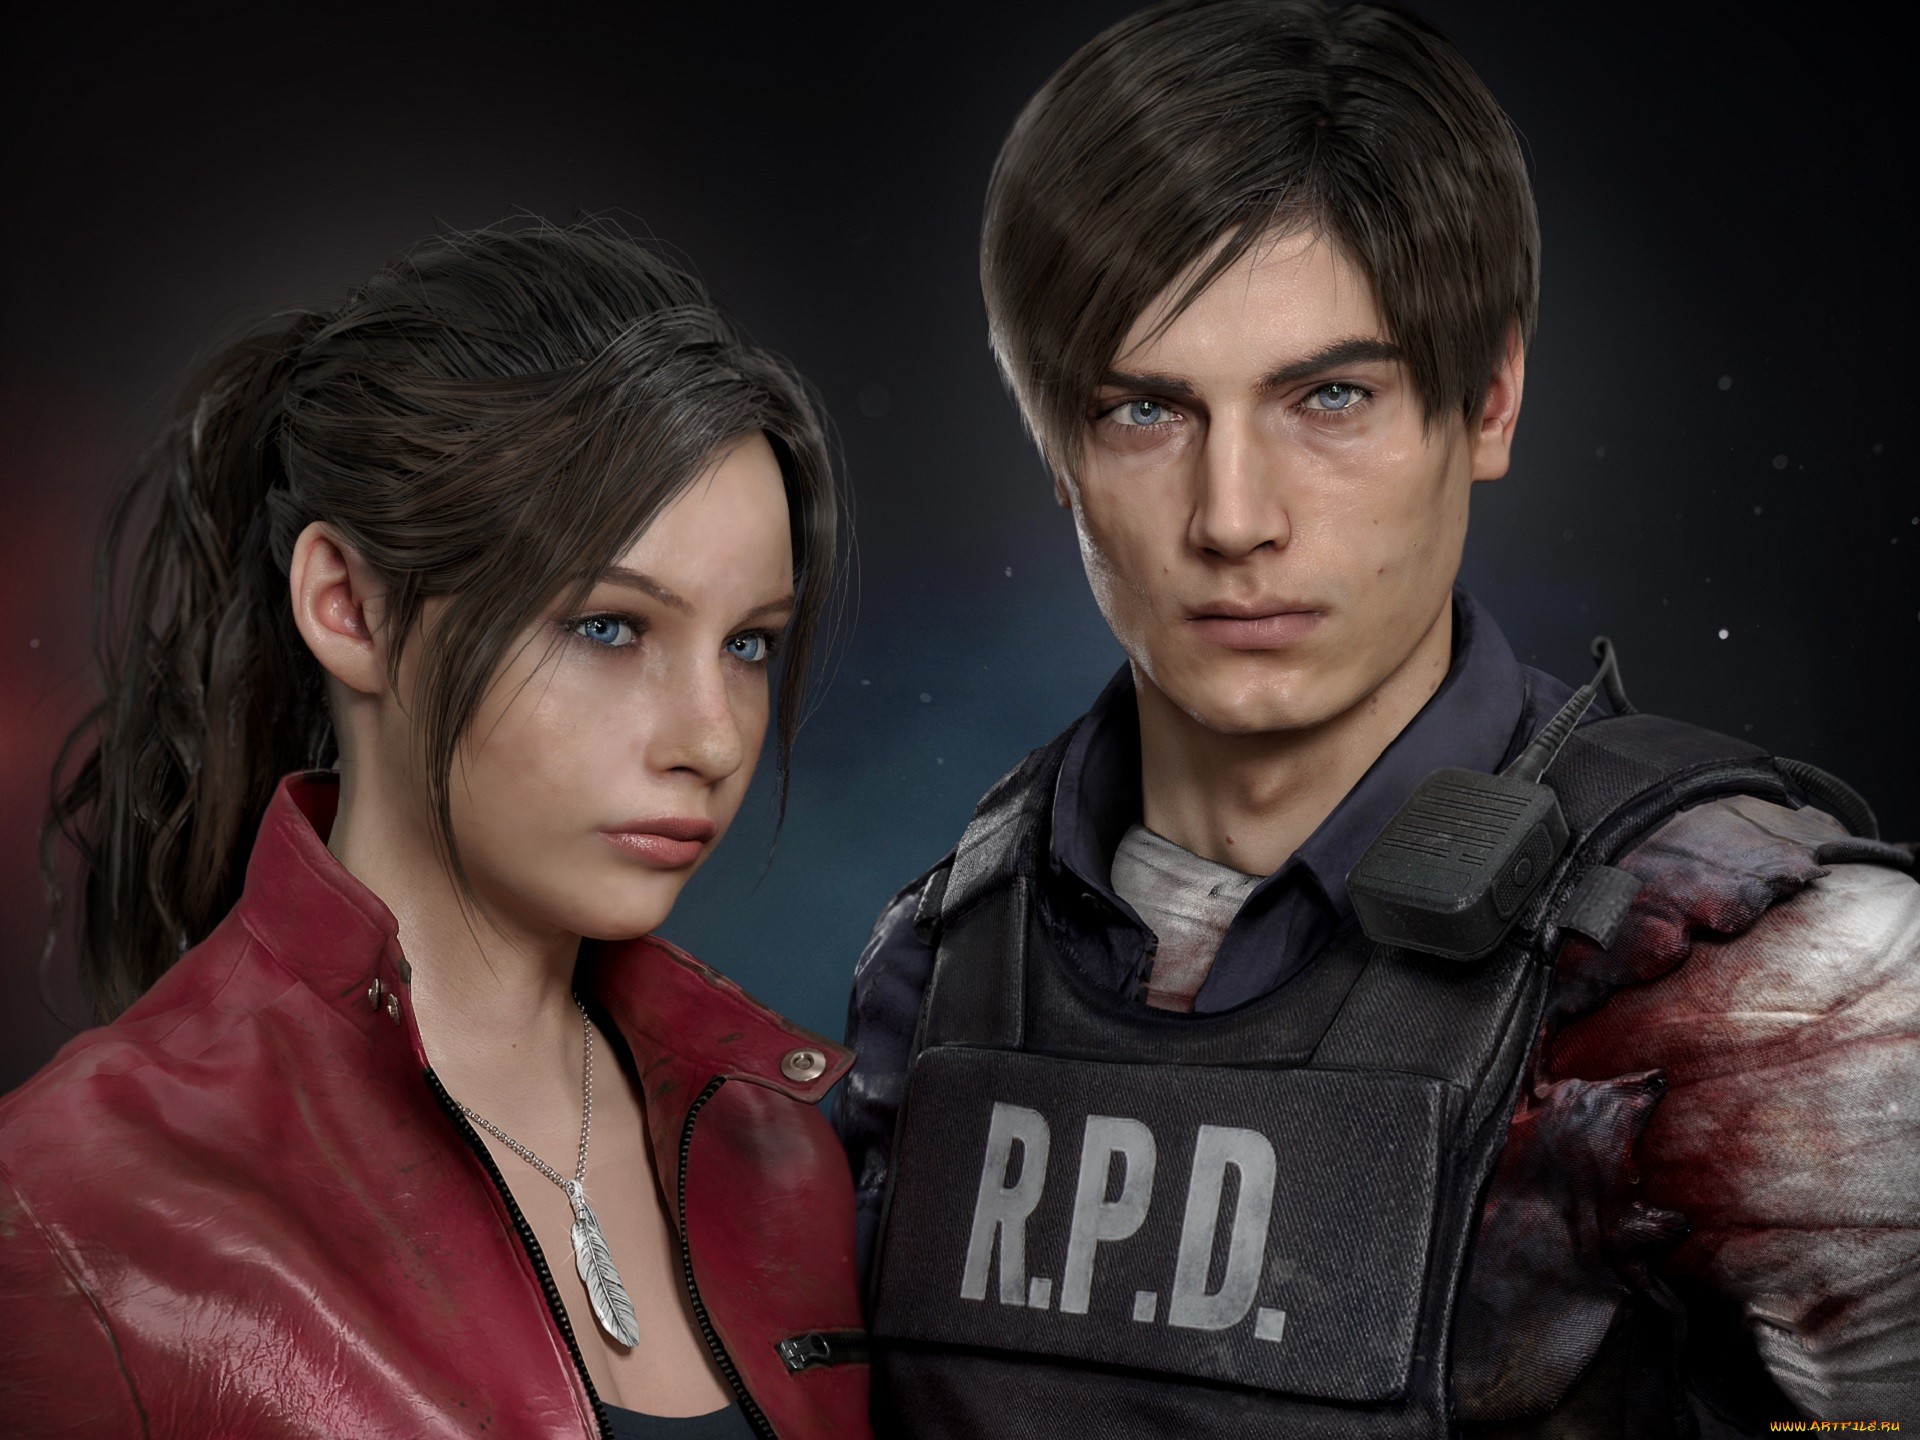 General 1920x1440 Resident Evil 2 Remake video games Video Game Heroes Claire Redfield Leon S. Kennedy video game characters Capcom